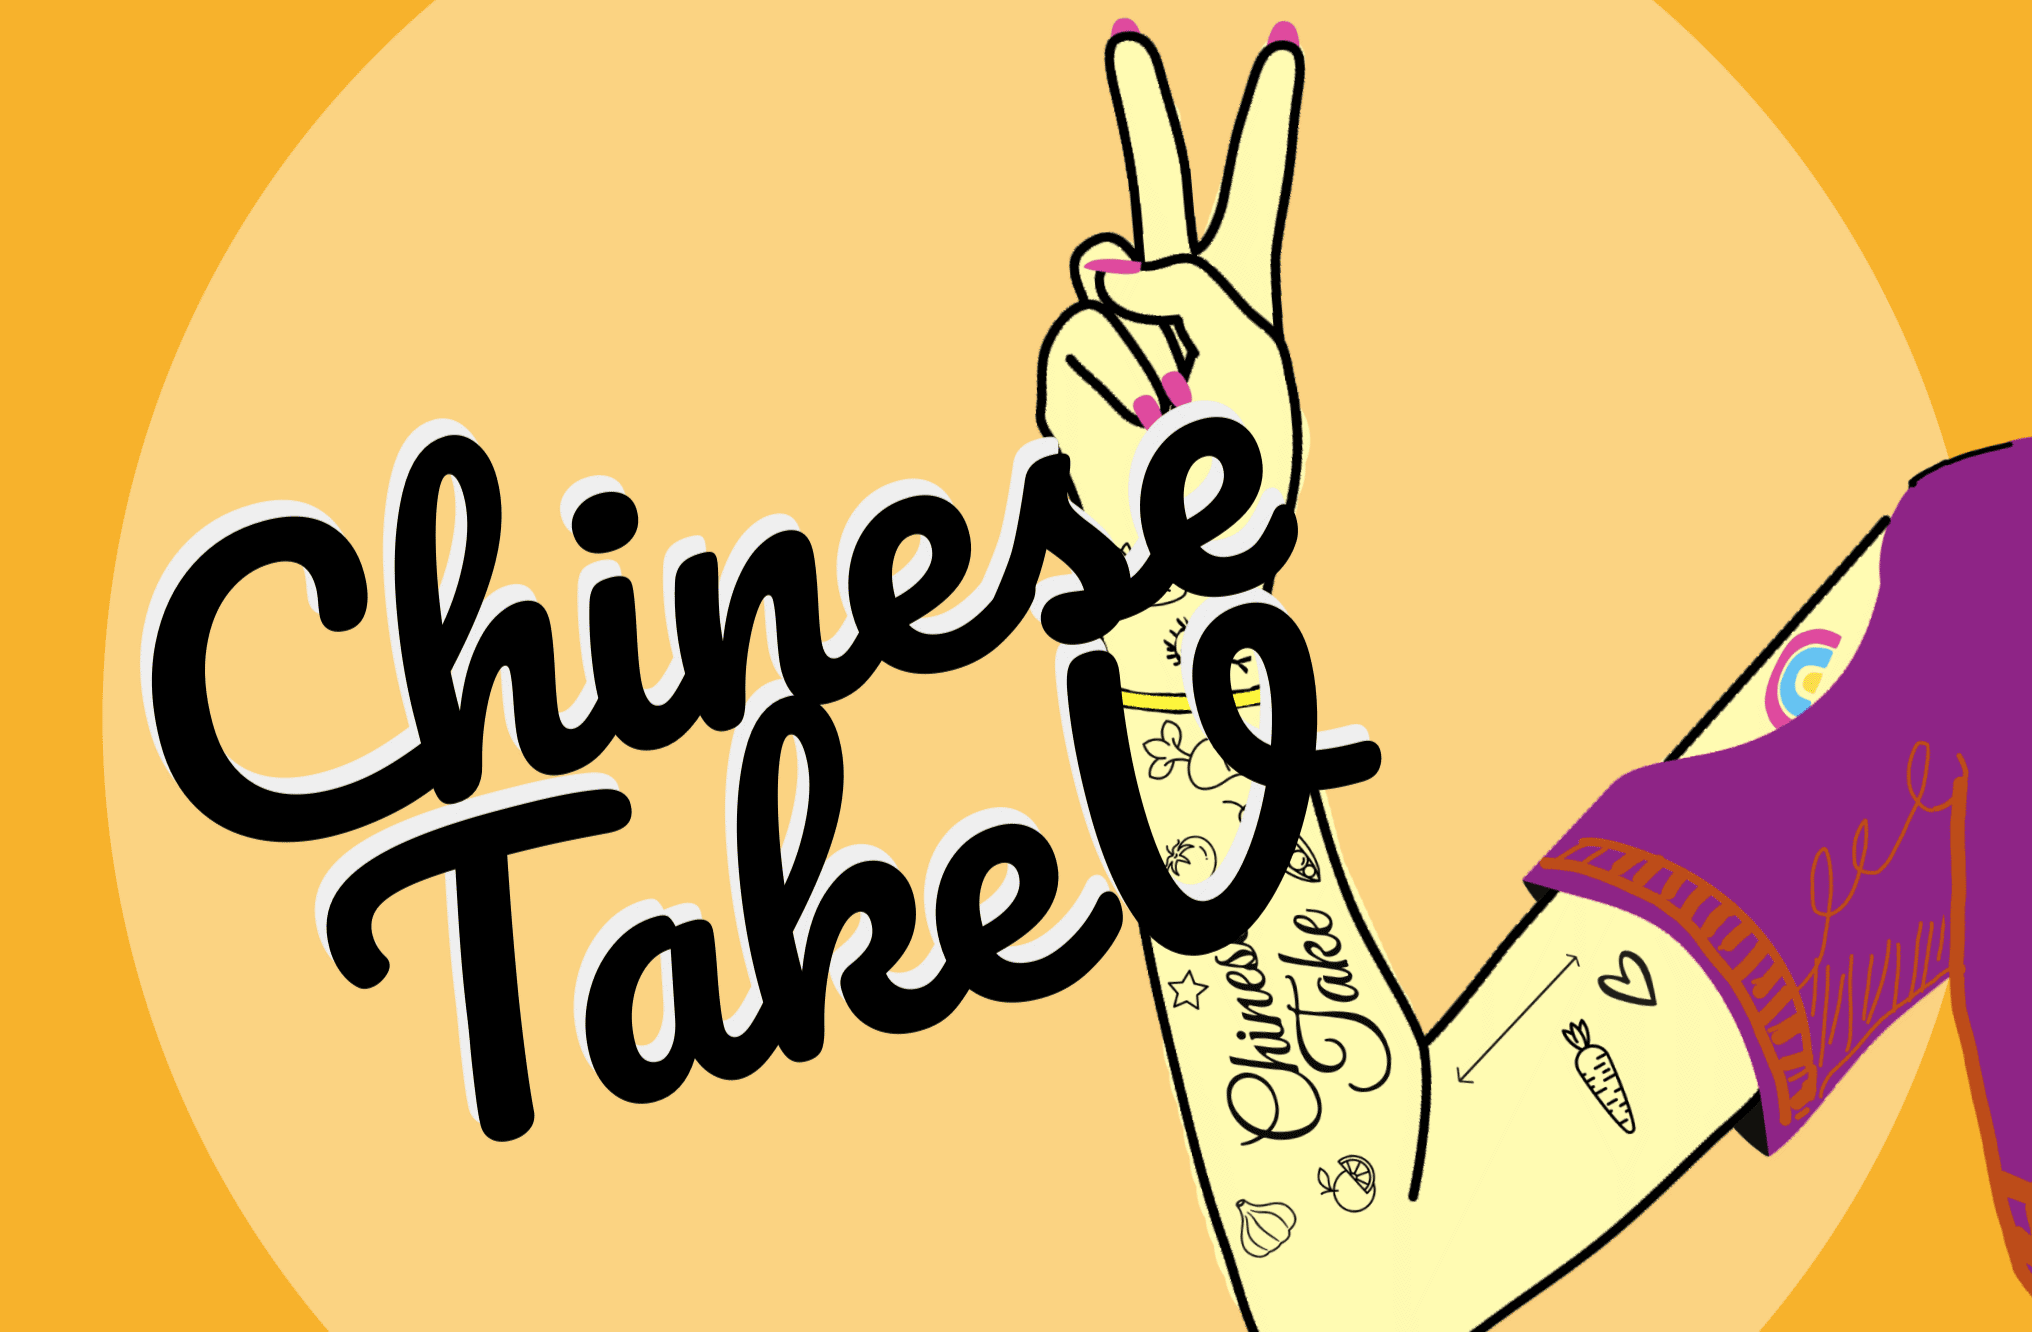 We are Chinese TakeV. Yes, we do Chinese Takeaway, and yes, we do Vegan food.